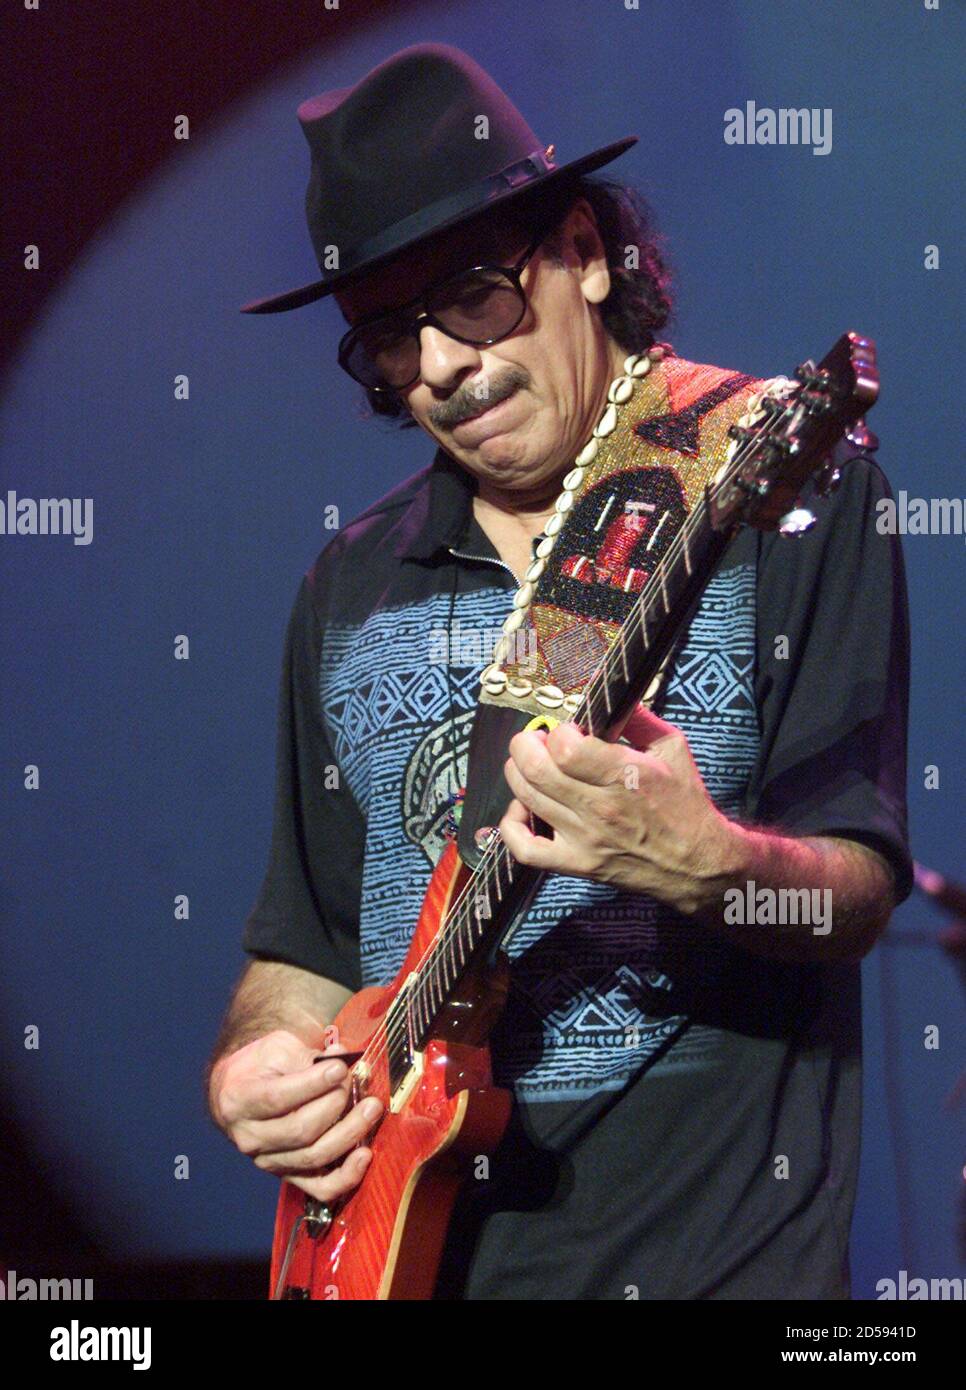 Carlos Santana performs during a concert in Munich, May 27. The career of  Rock 'n Roll Hall of Famer Carlos Santana has spanned three decades and  produced sales of more than 50